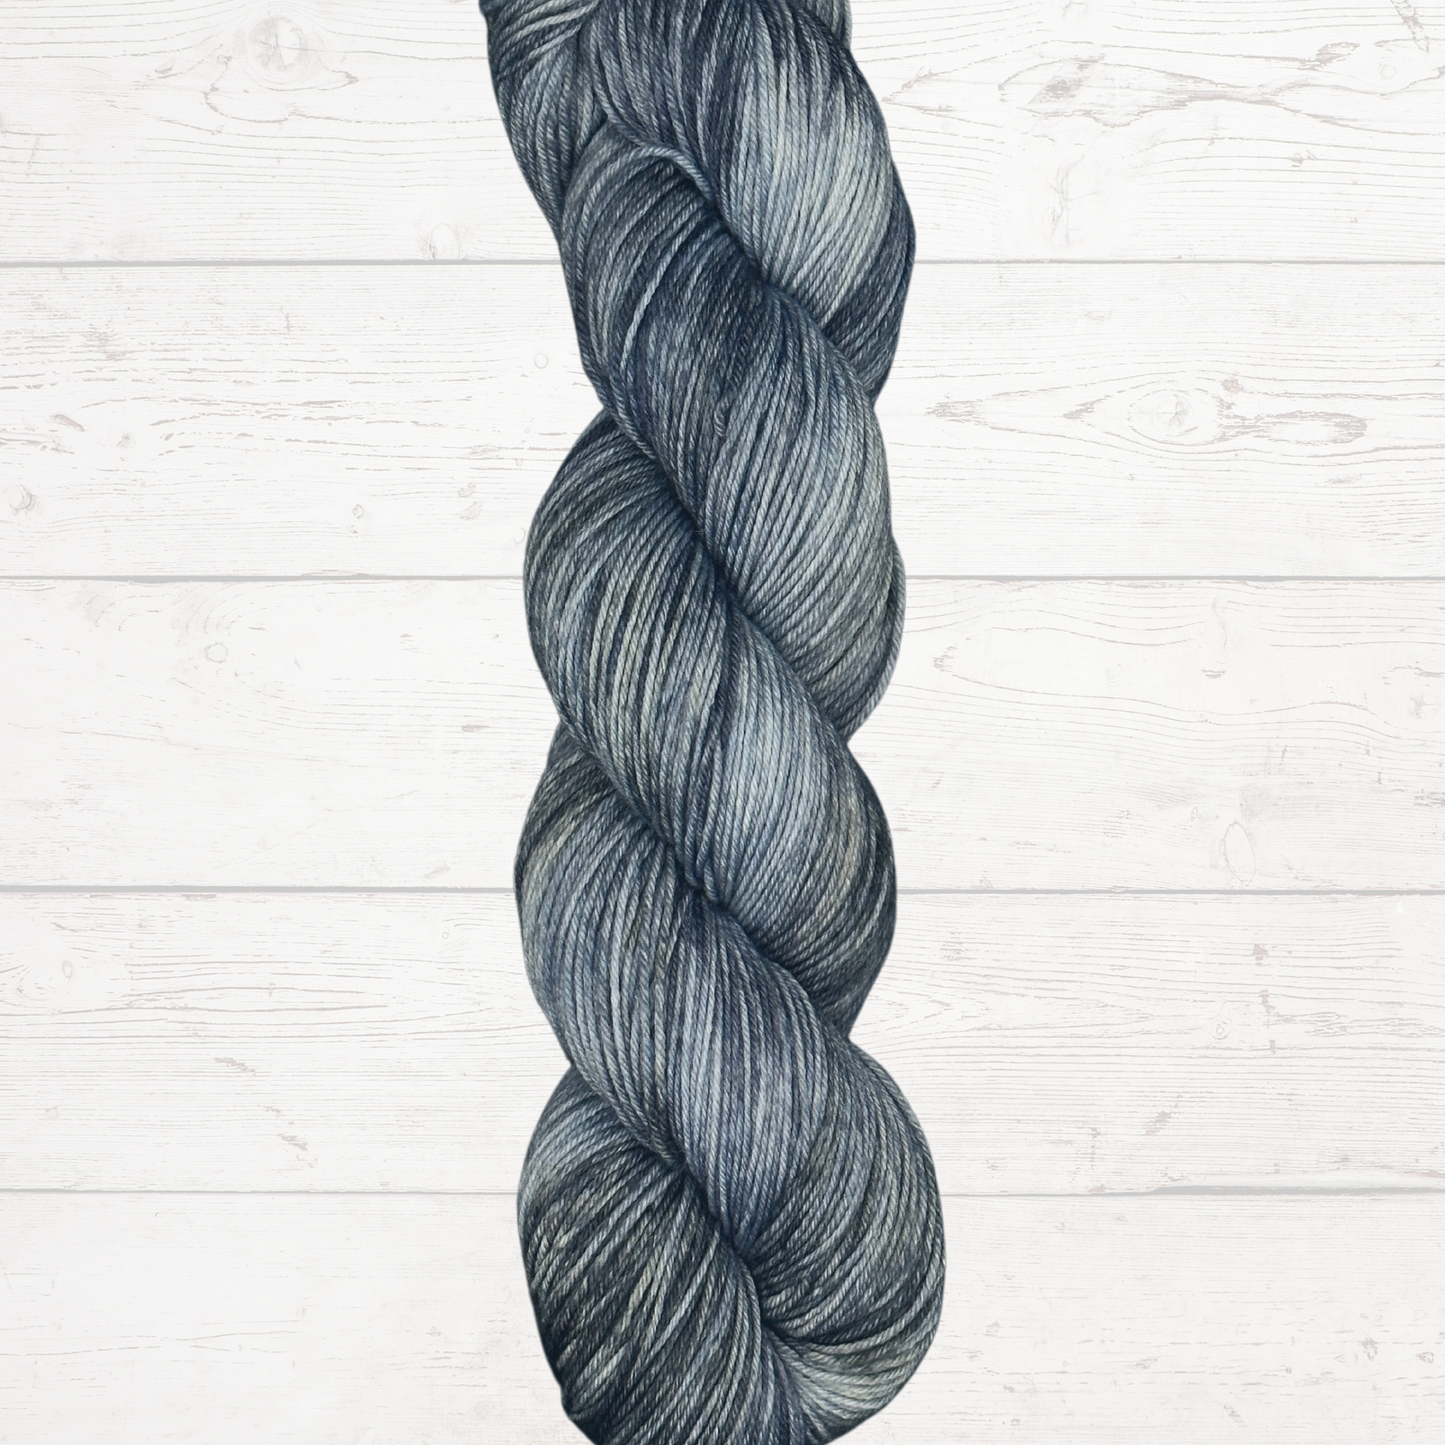 Blue and Grey Hand Dyed Yarn - One of a Kind